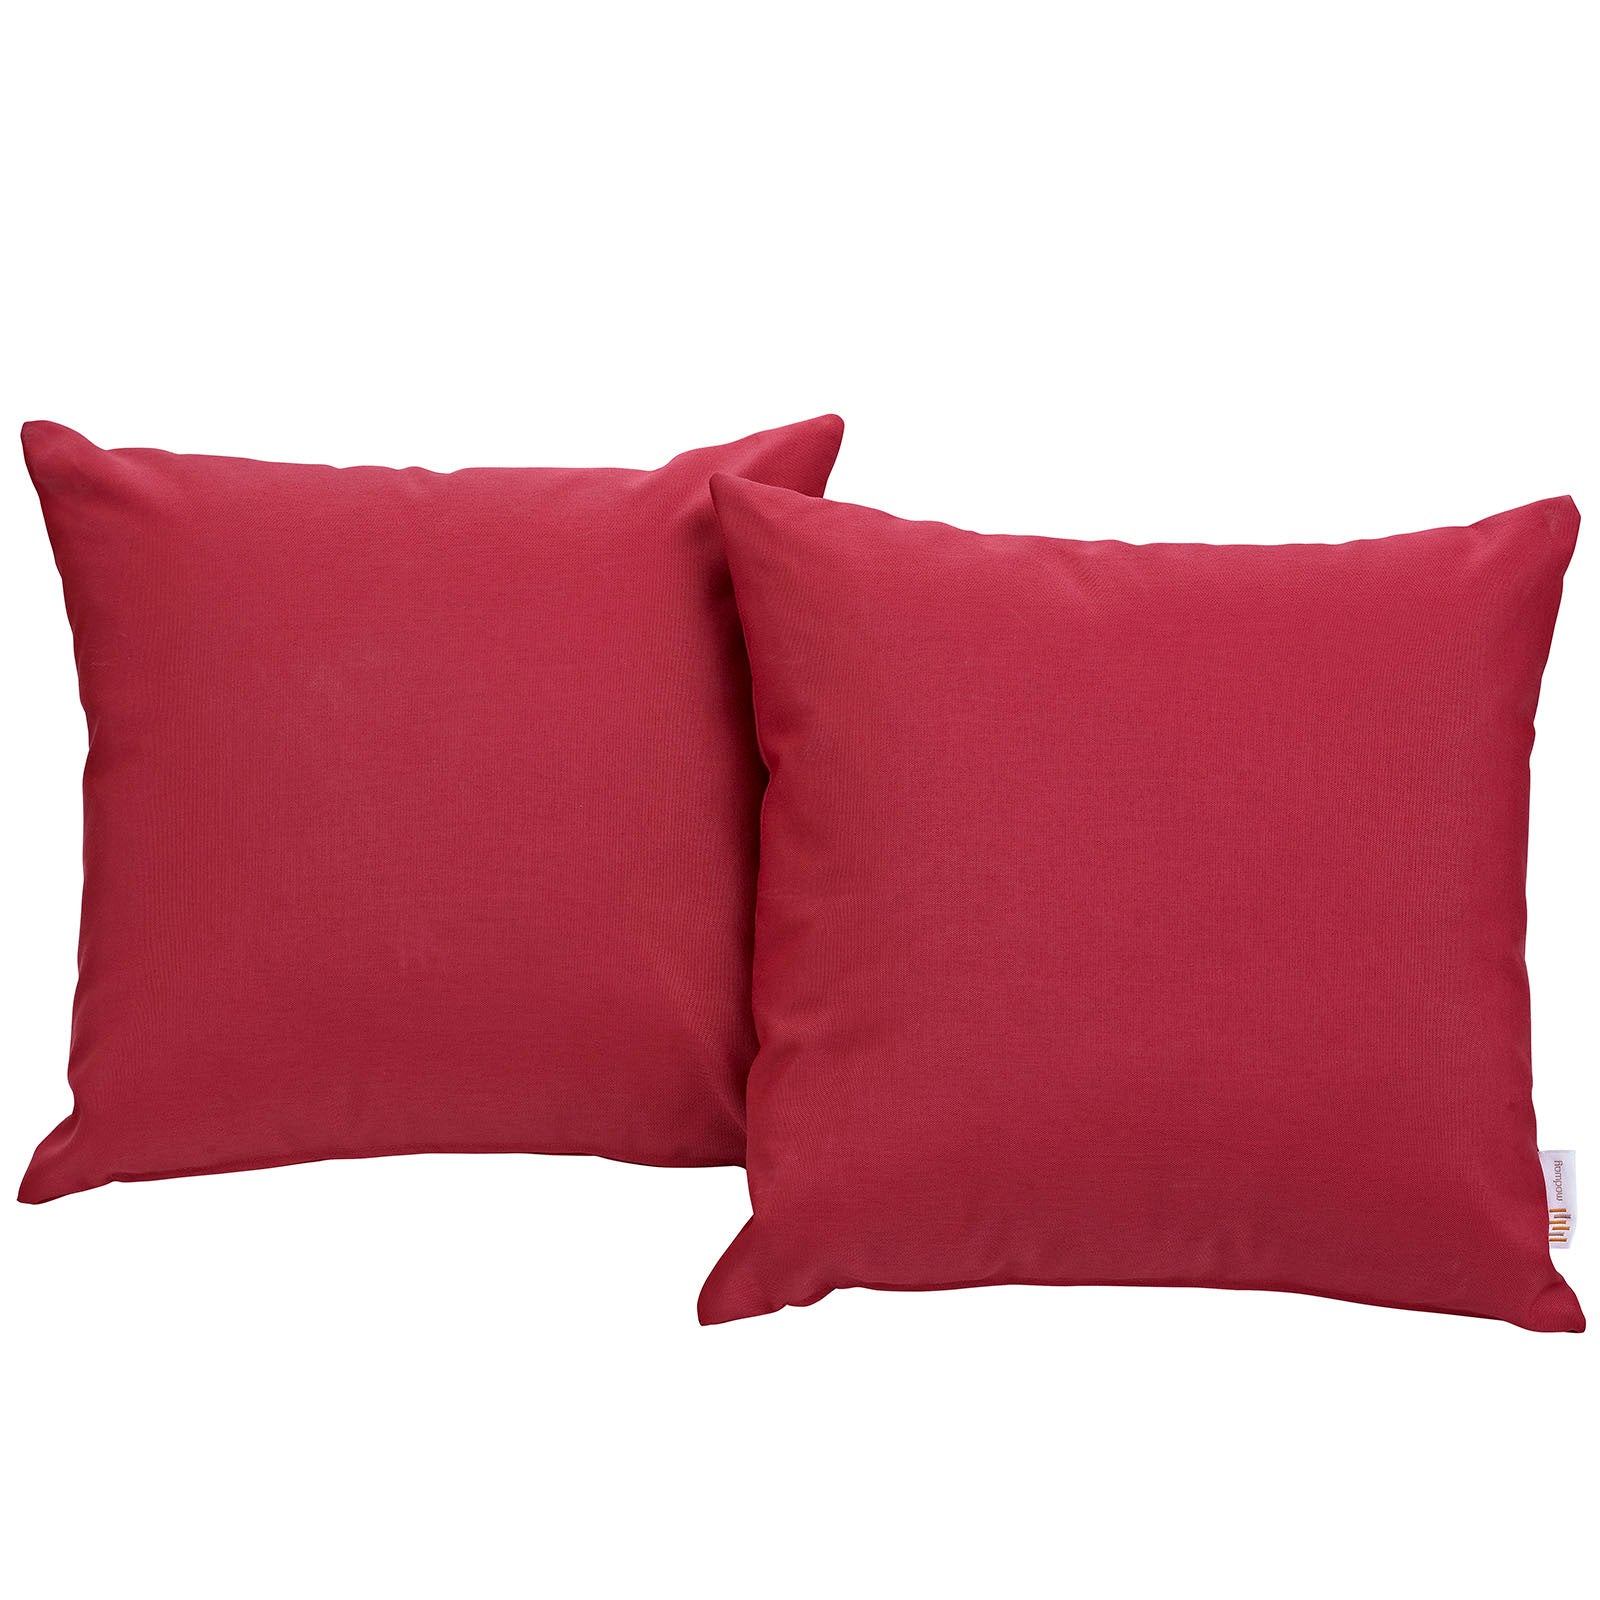 Modway Outdoor Pillows & Cushions - Convene Outdoor Patio Pillow Red (Set of 2)